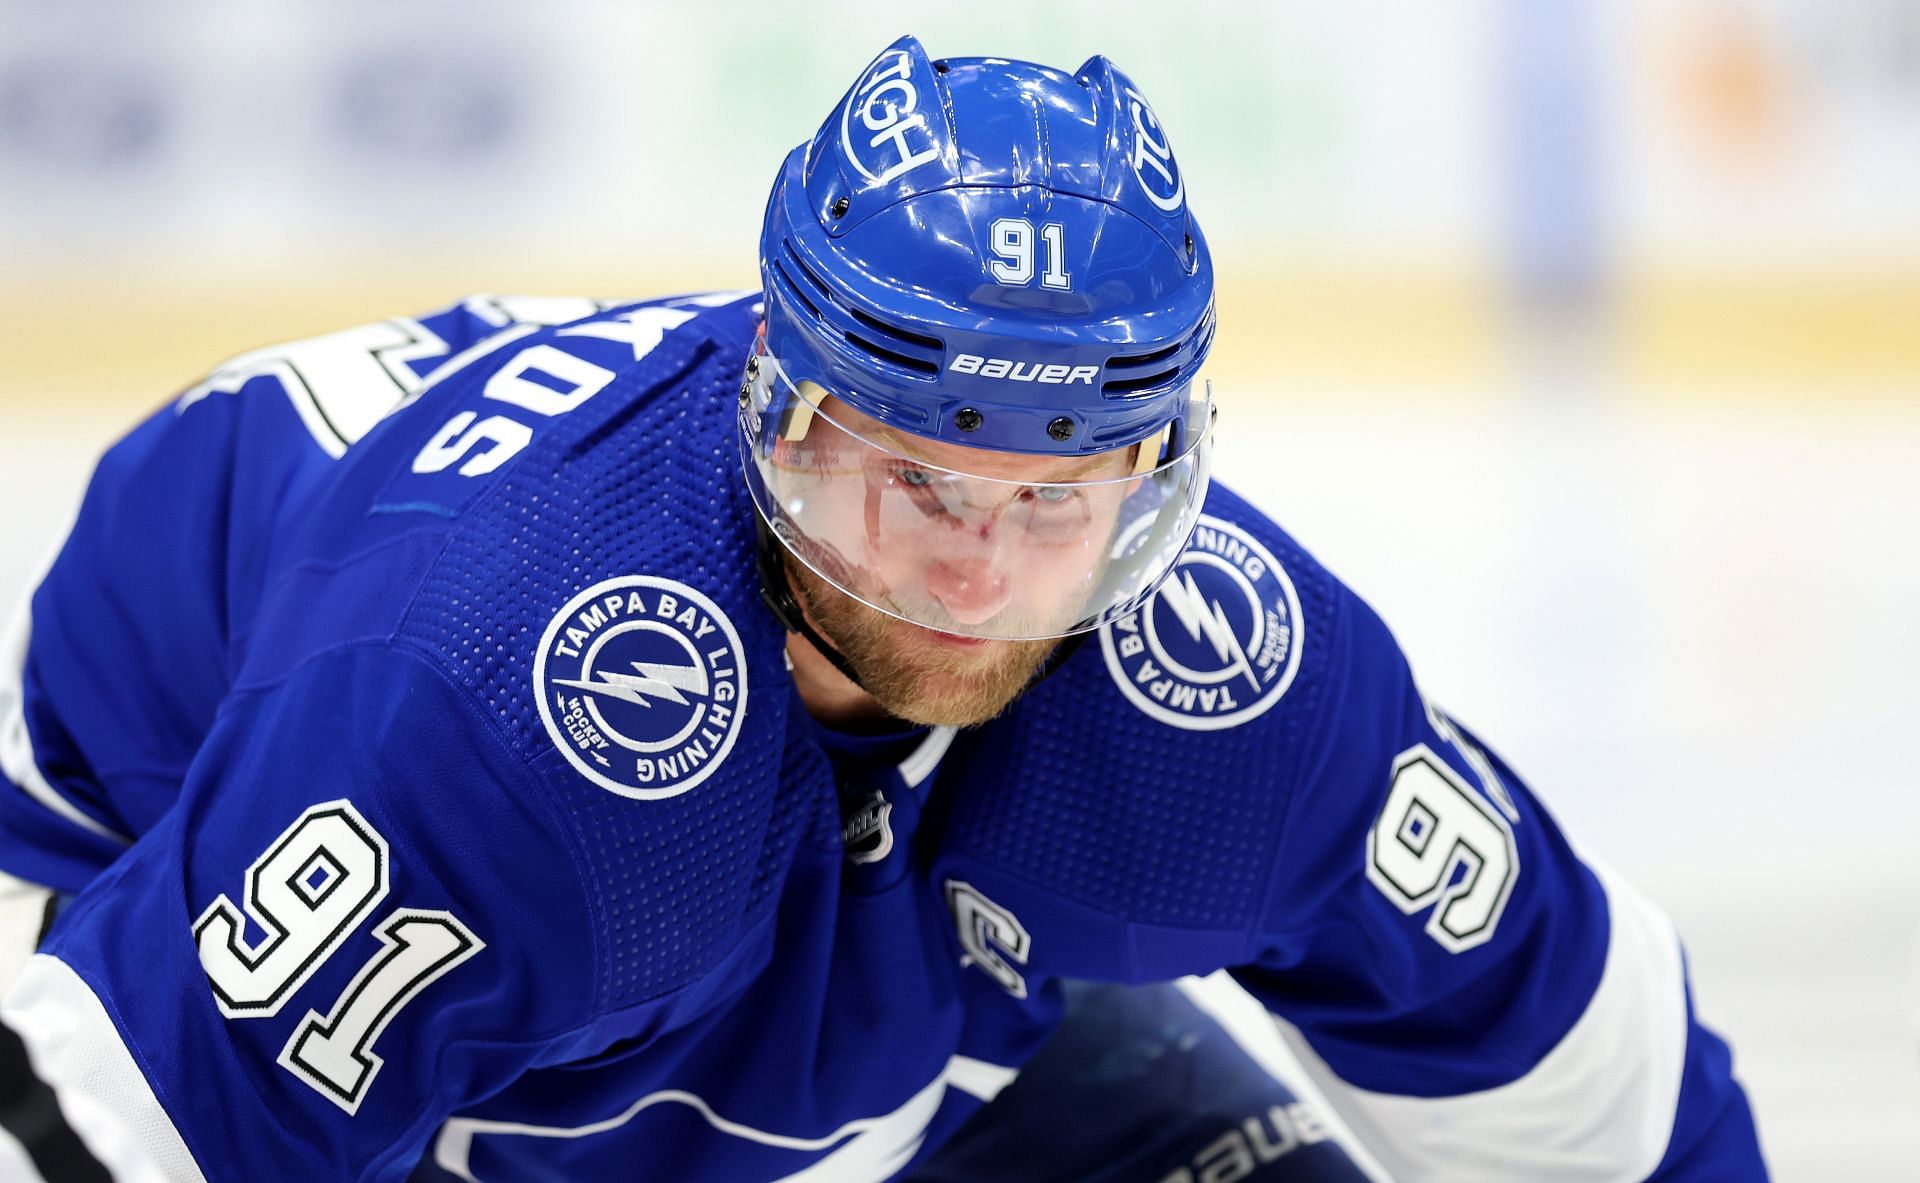 Steven Stamkos is an answer to one of the grids